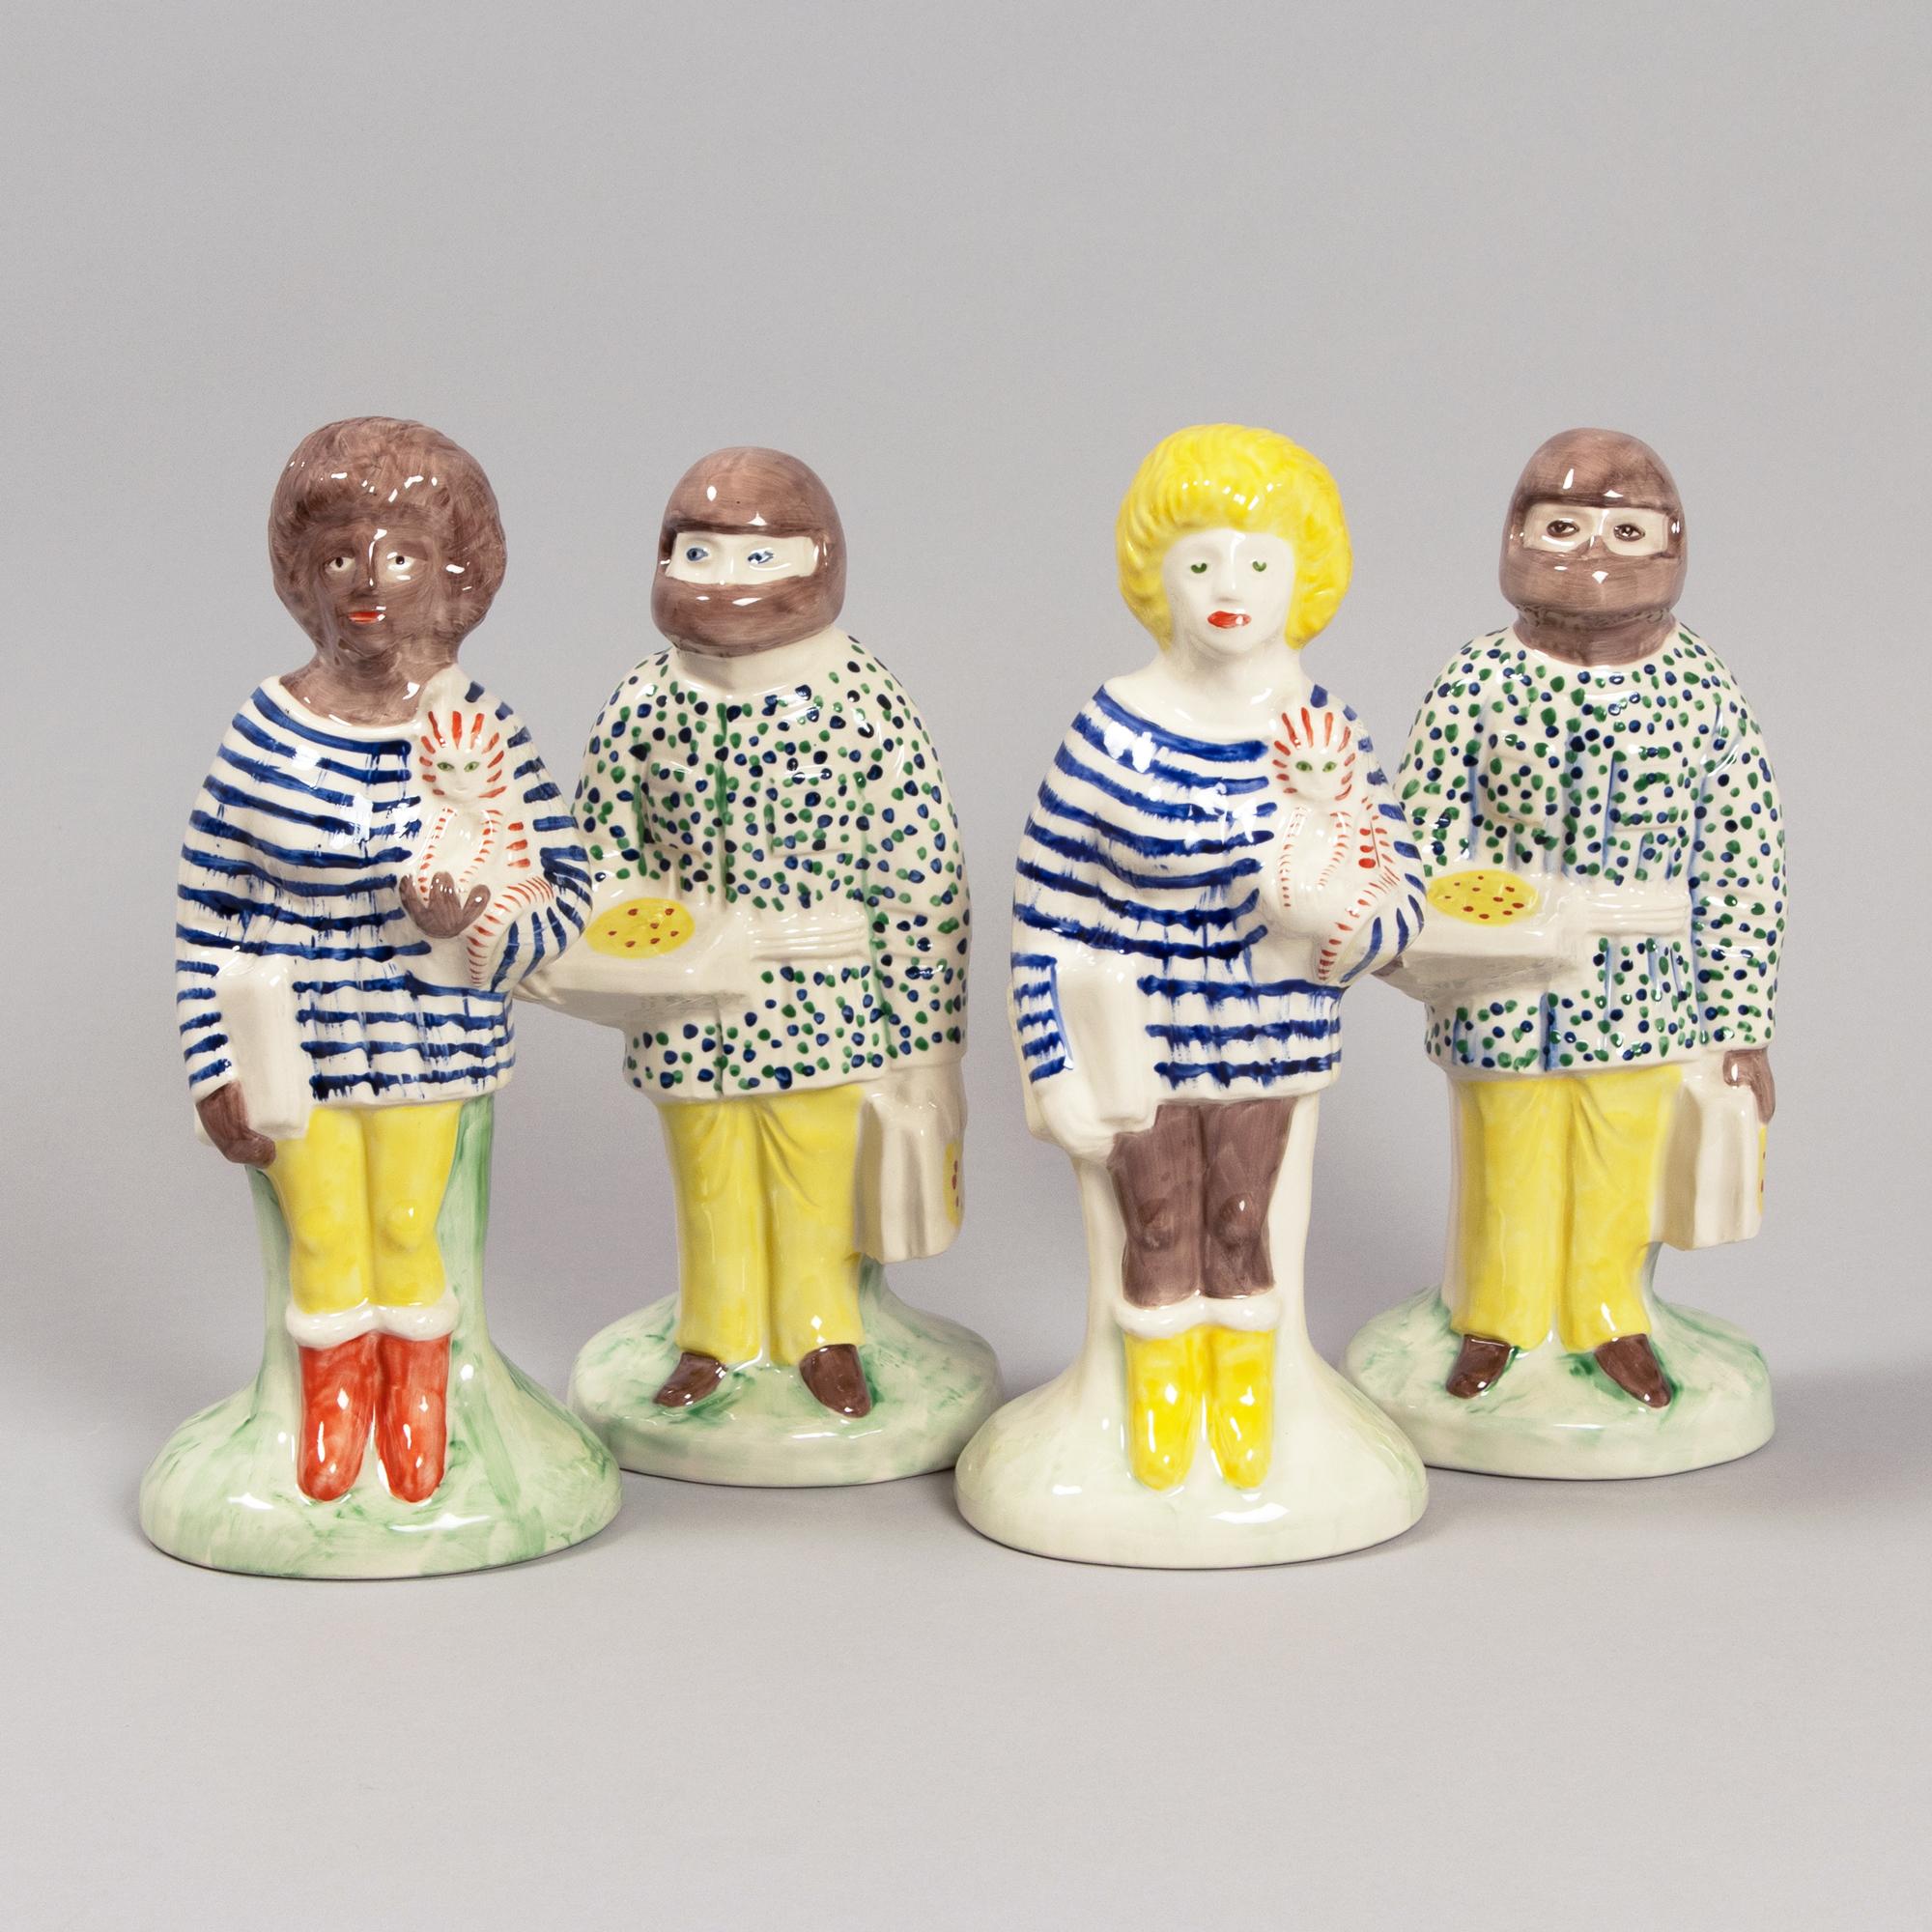 Grayson Perry, Home Worker & Key Worker Staffordshire Figures - Ceramic Artwork